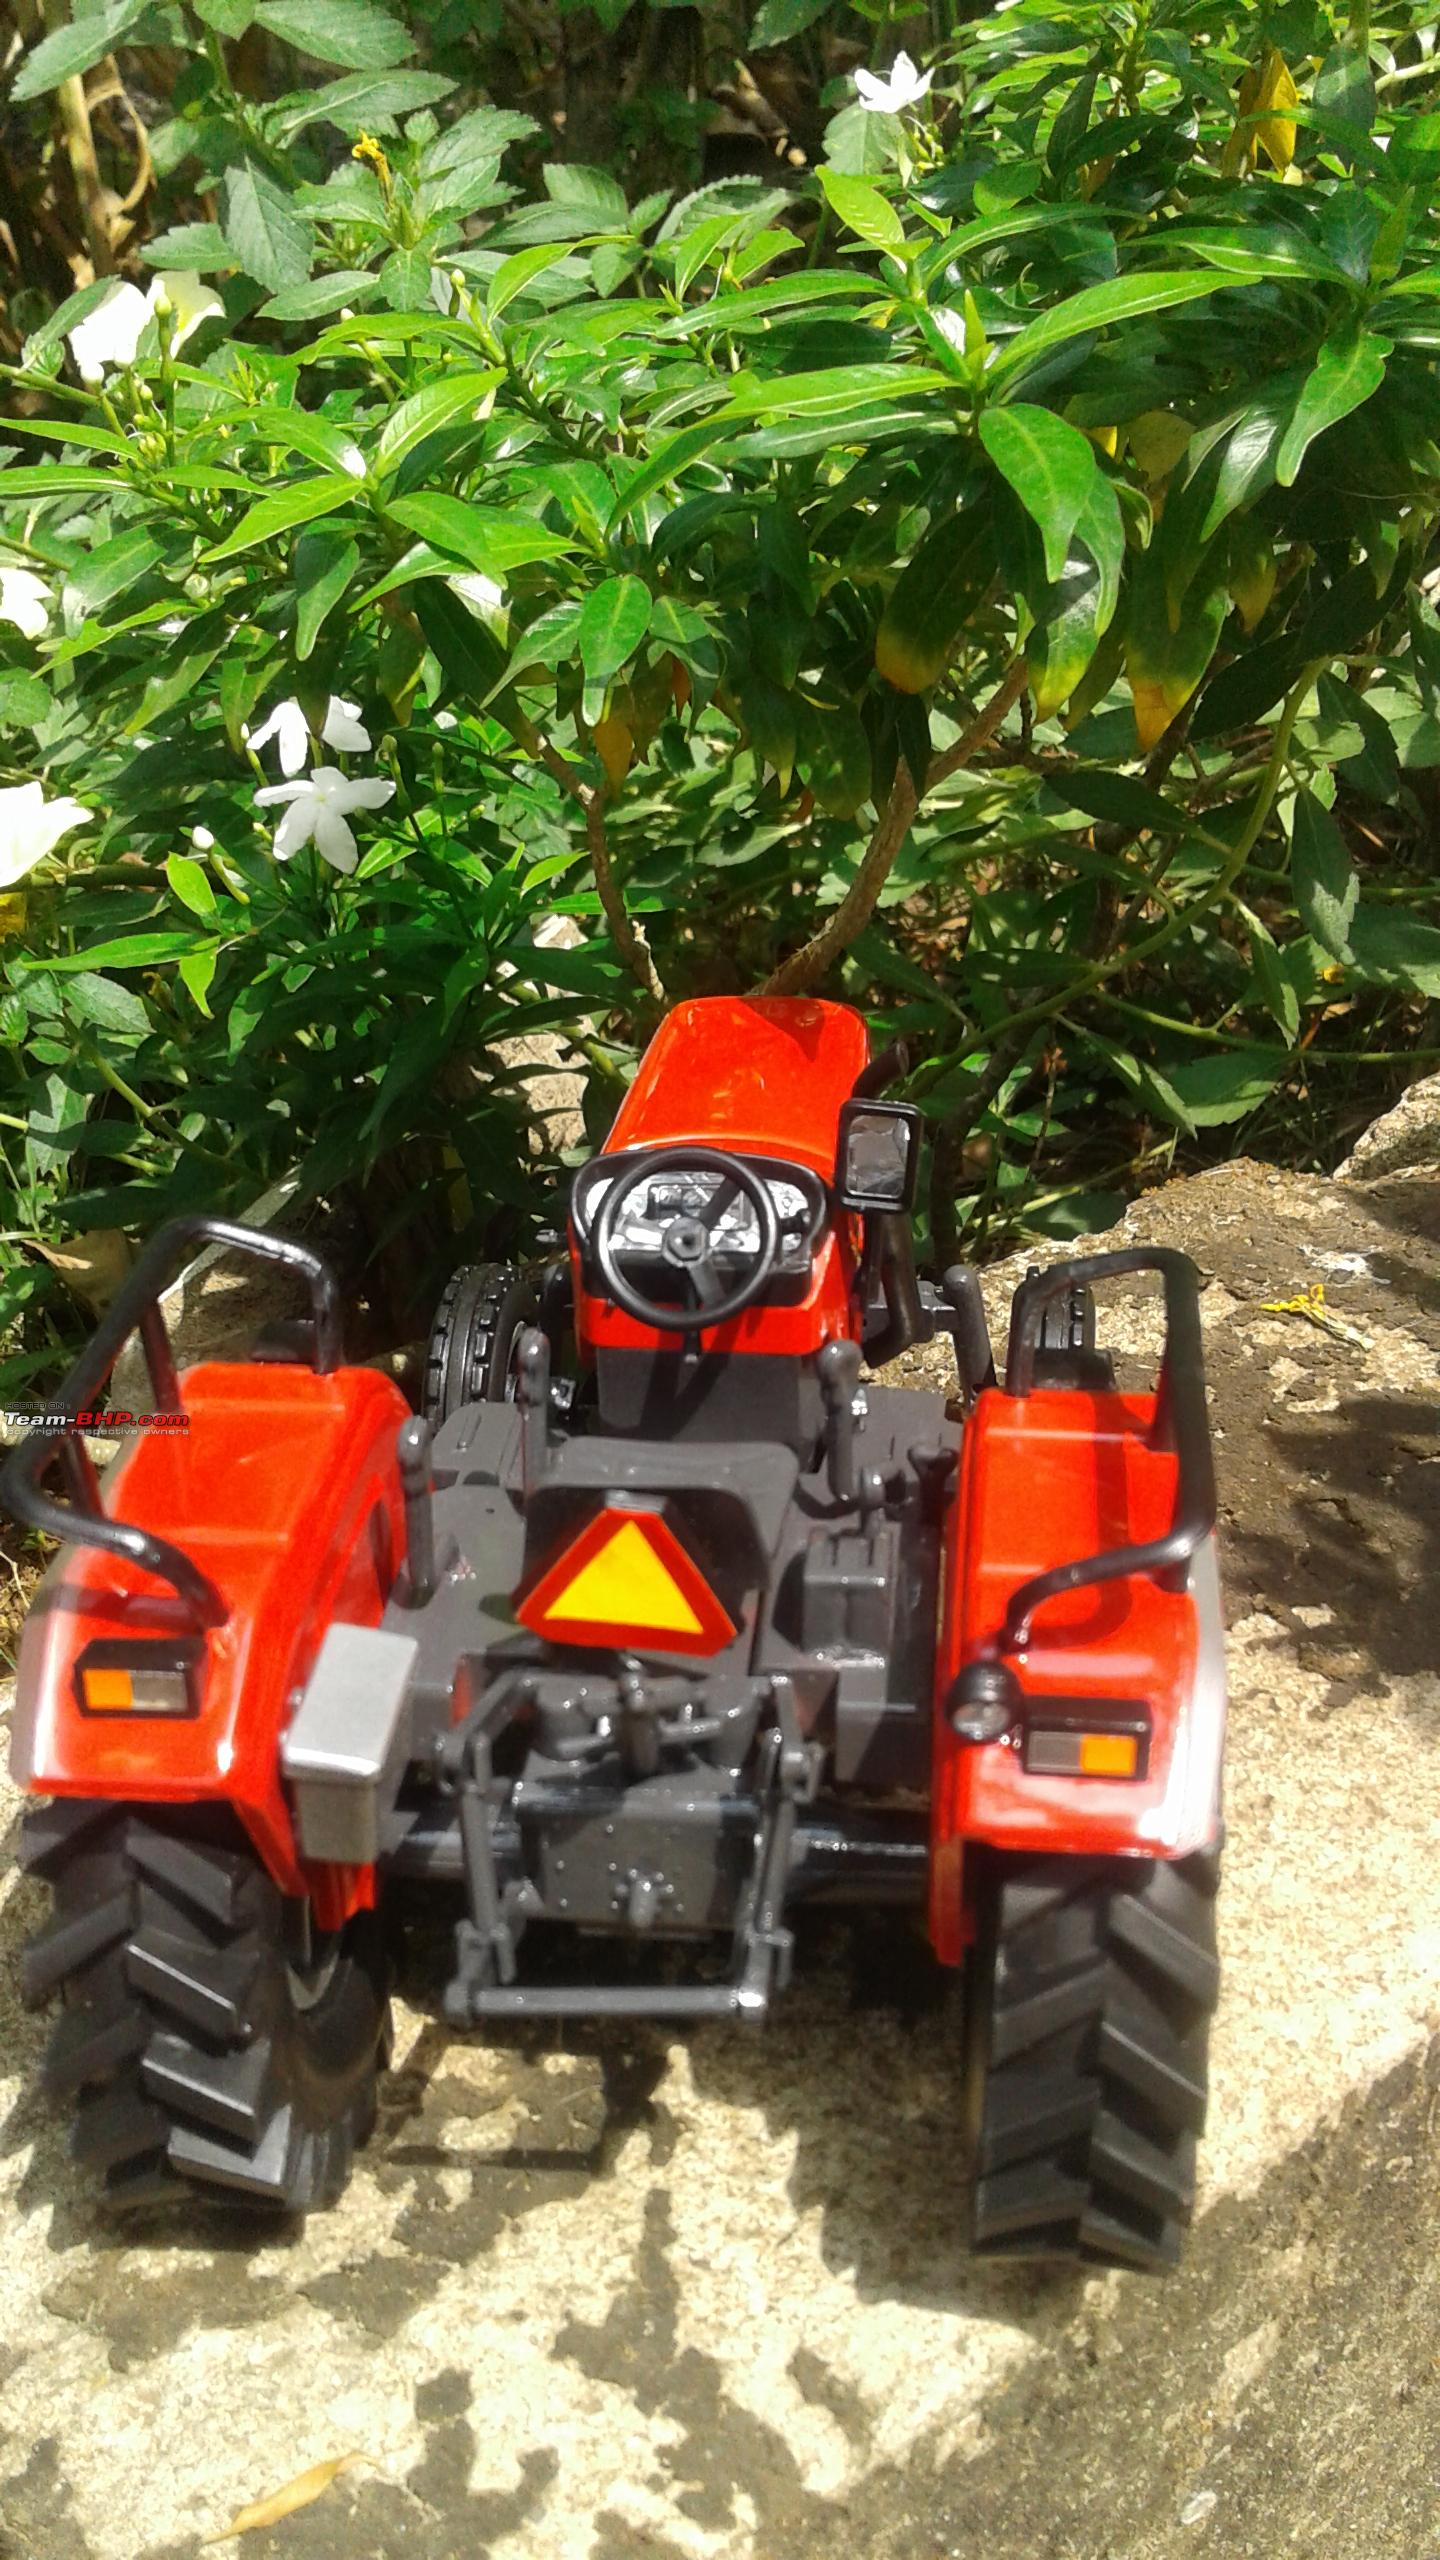 tractor toy model price